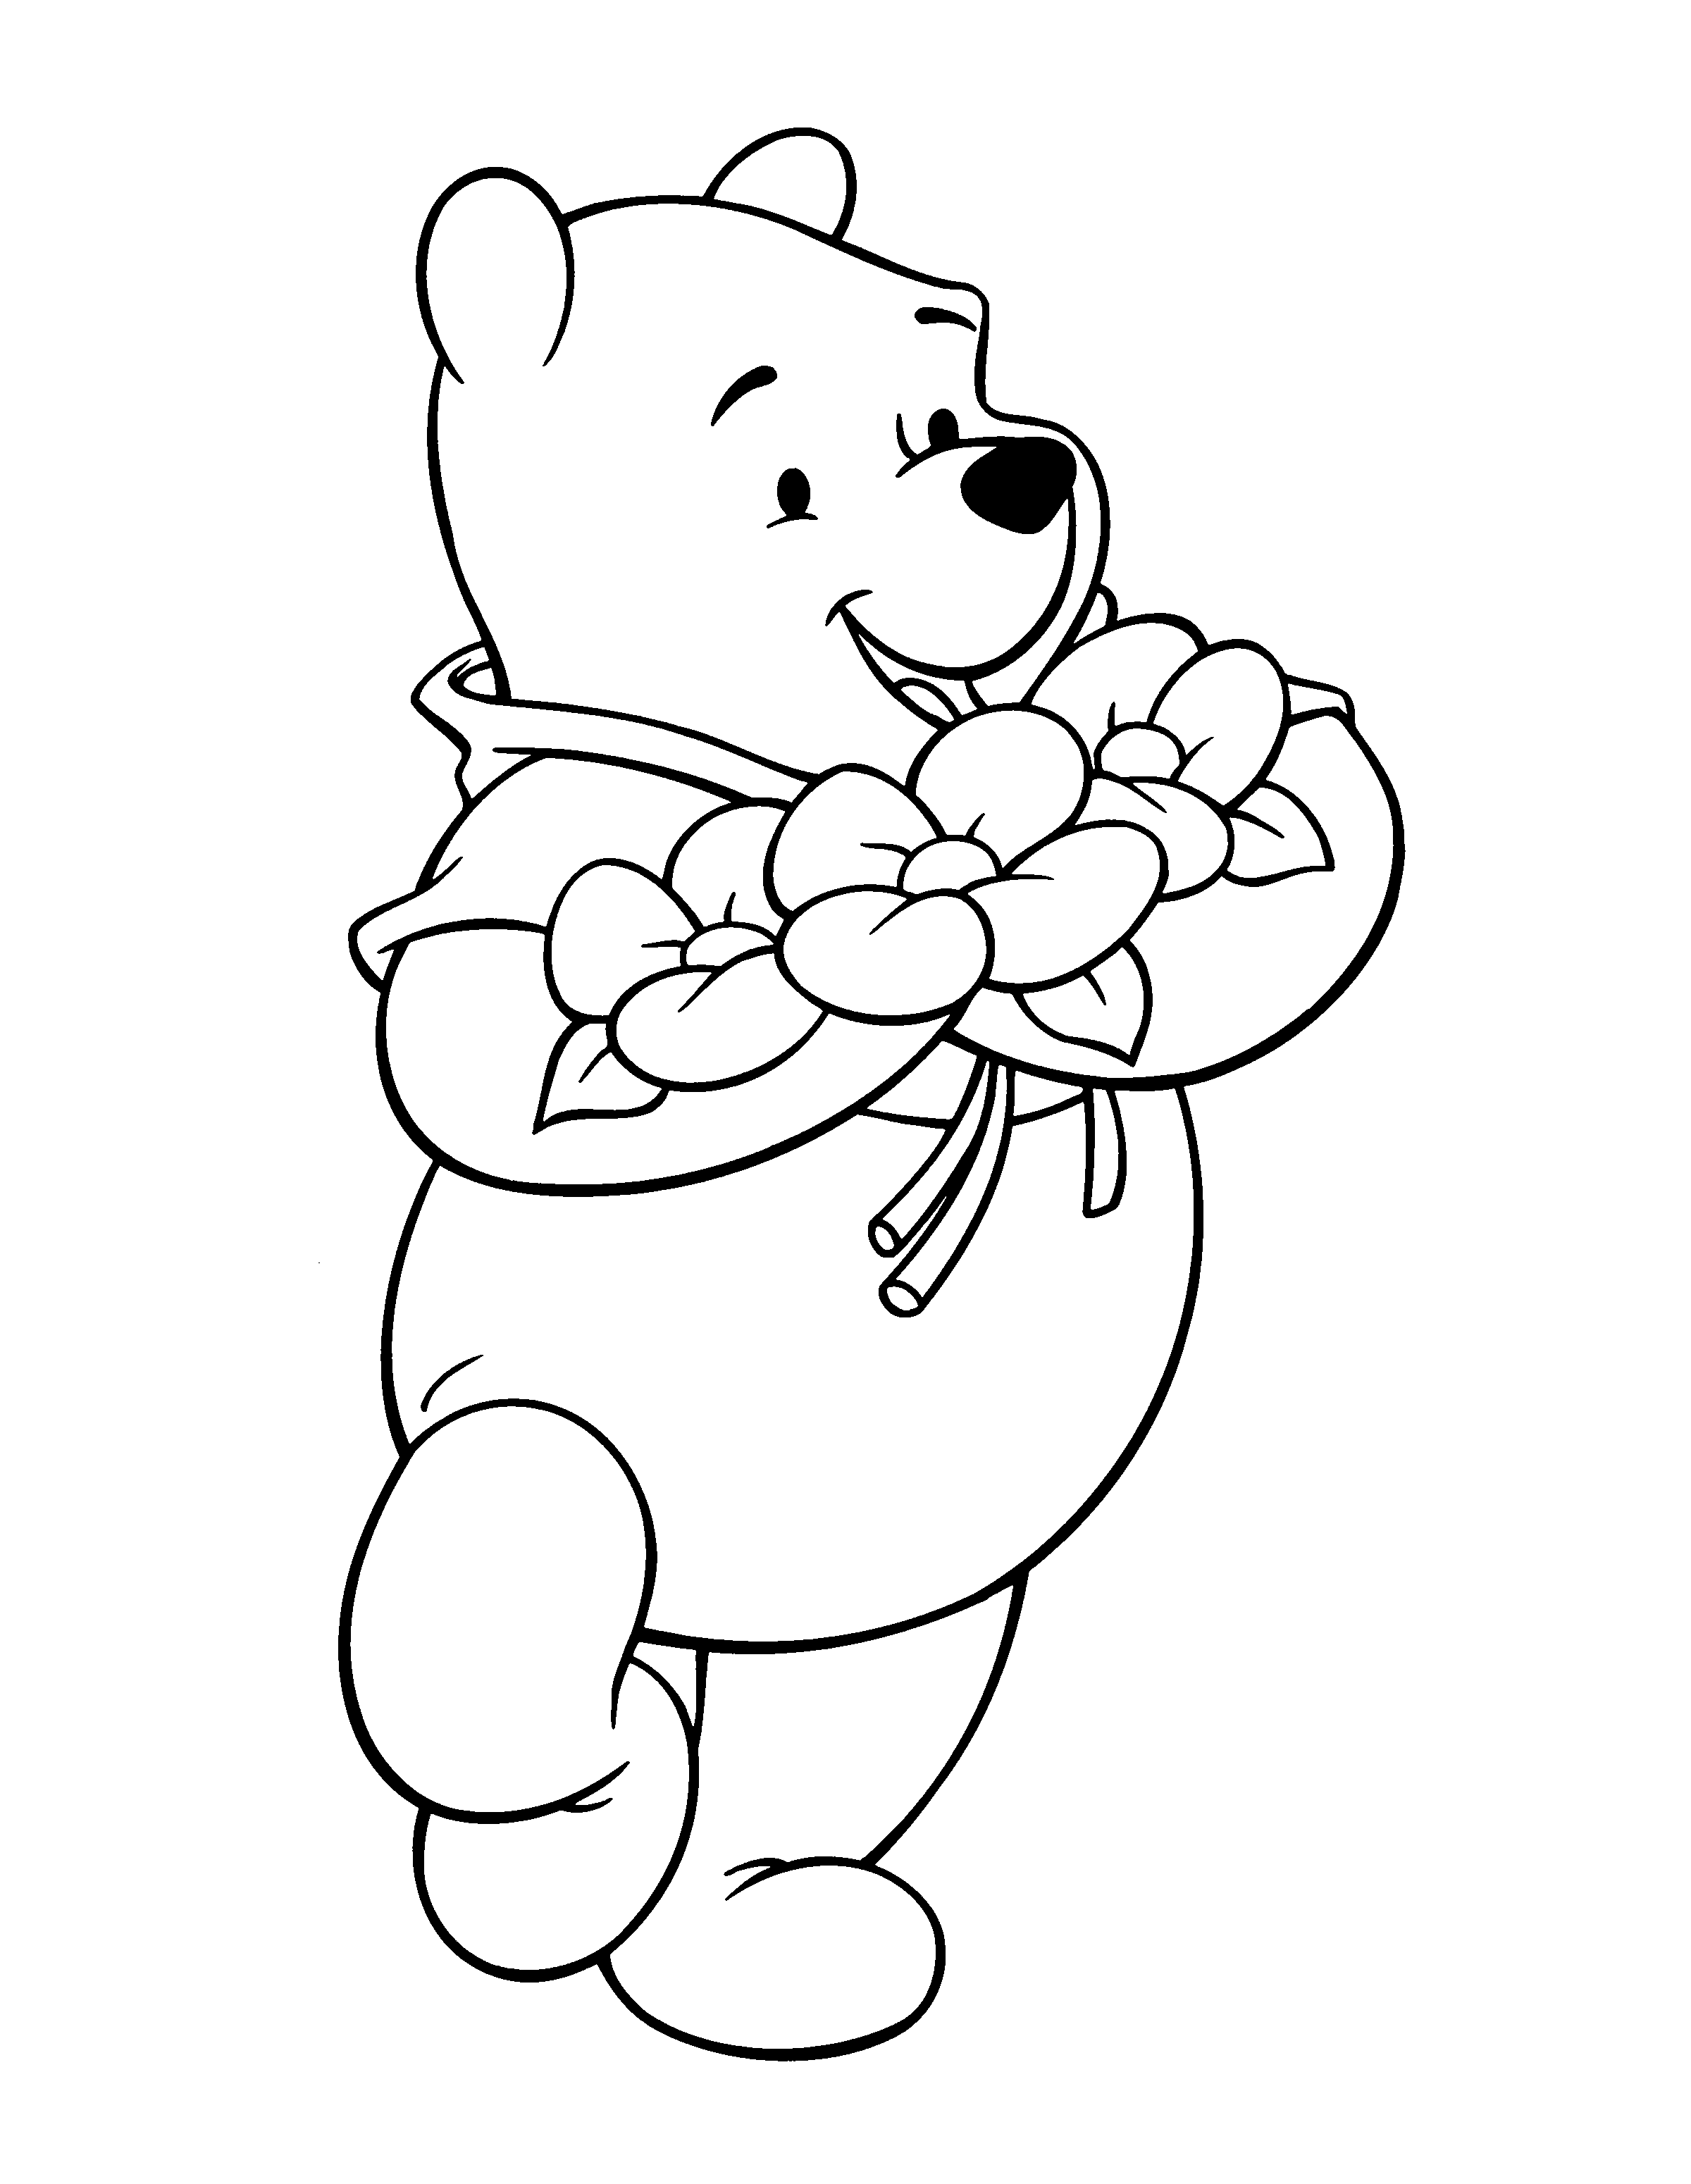 animated-coloring-pages-winnie-the-pooh-image-0034